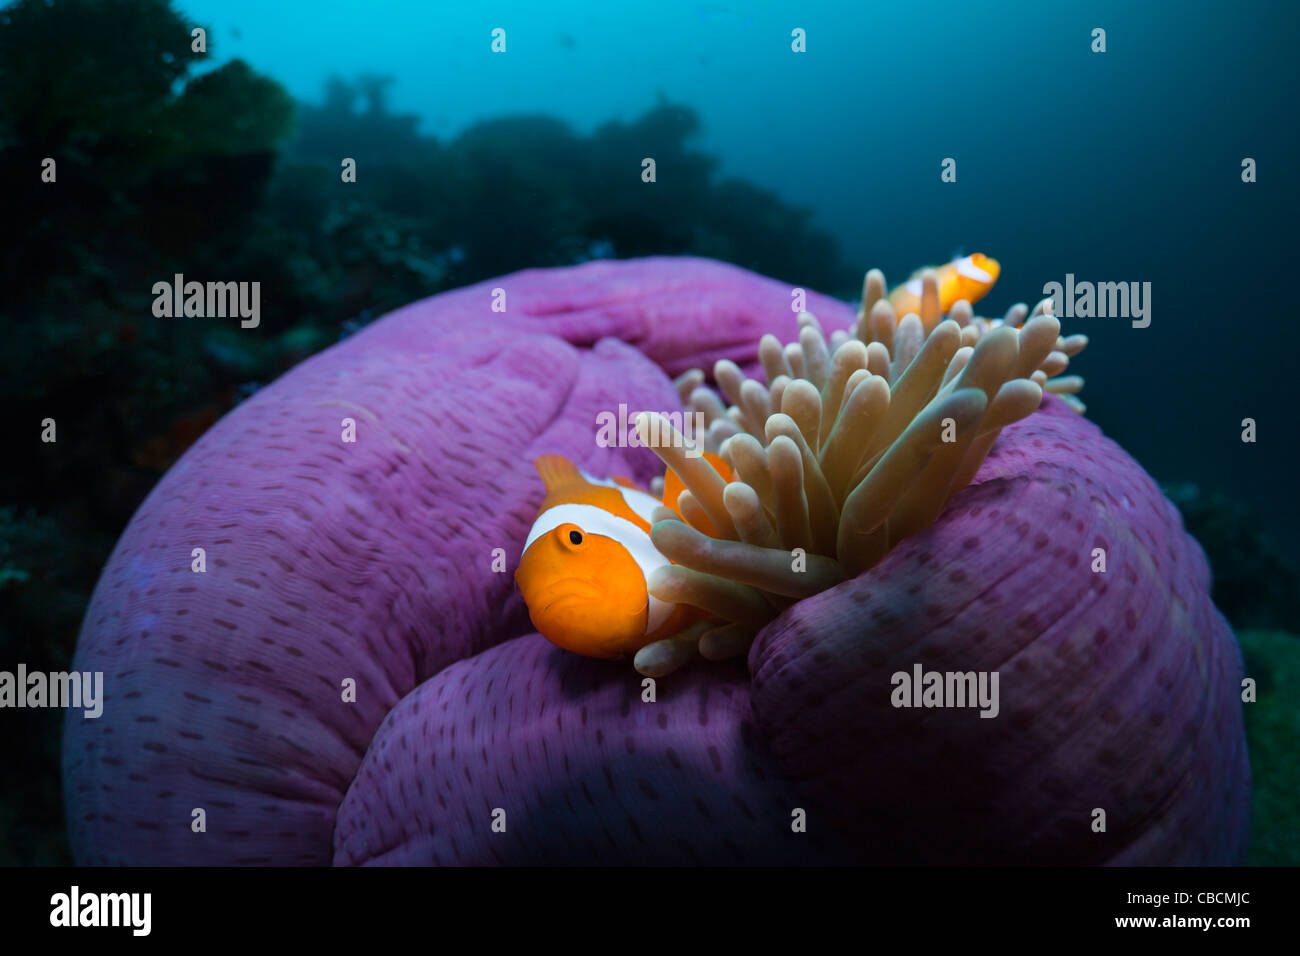 Clown Anemonefish in bleached Sea Anemone, Amphiprion ocellaris, Heteractis magnifica, West Papua, Indonesia Stock Photo